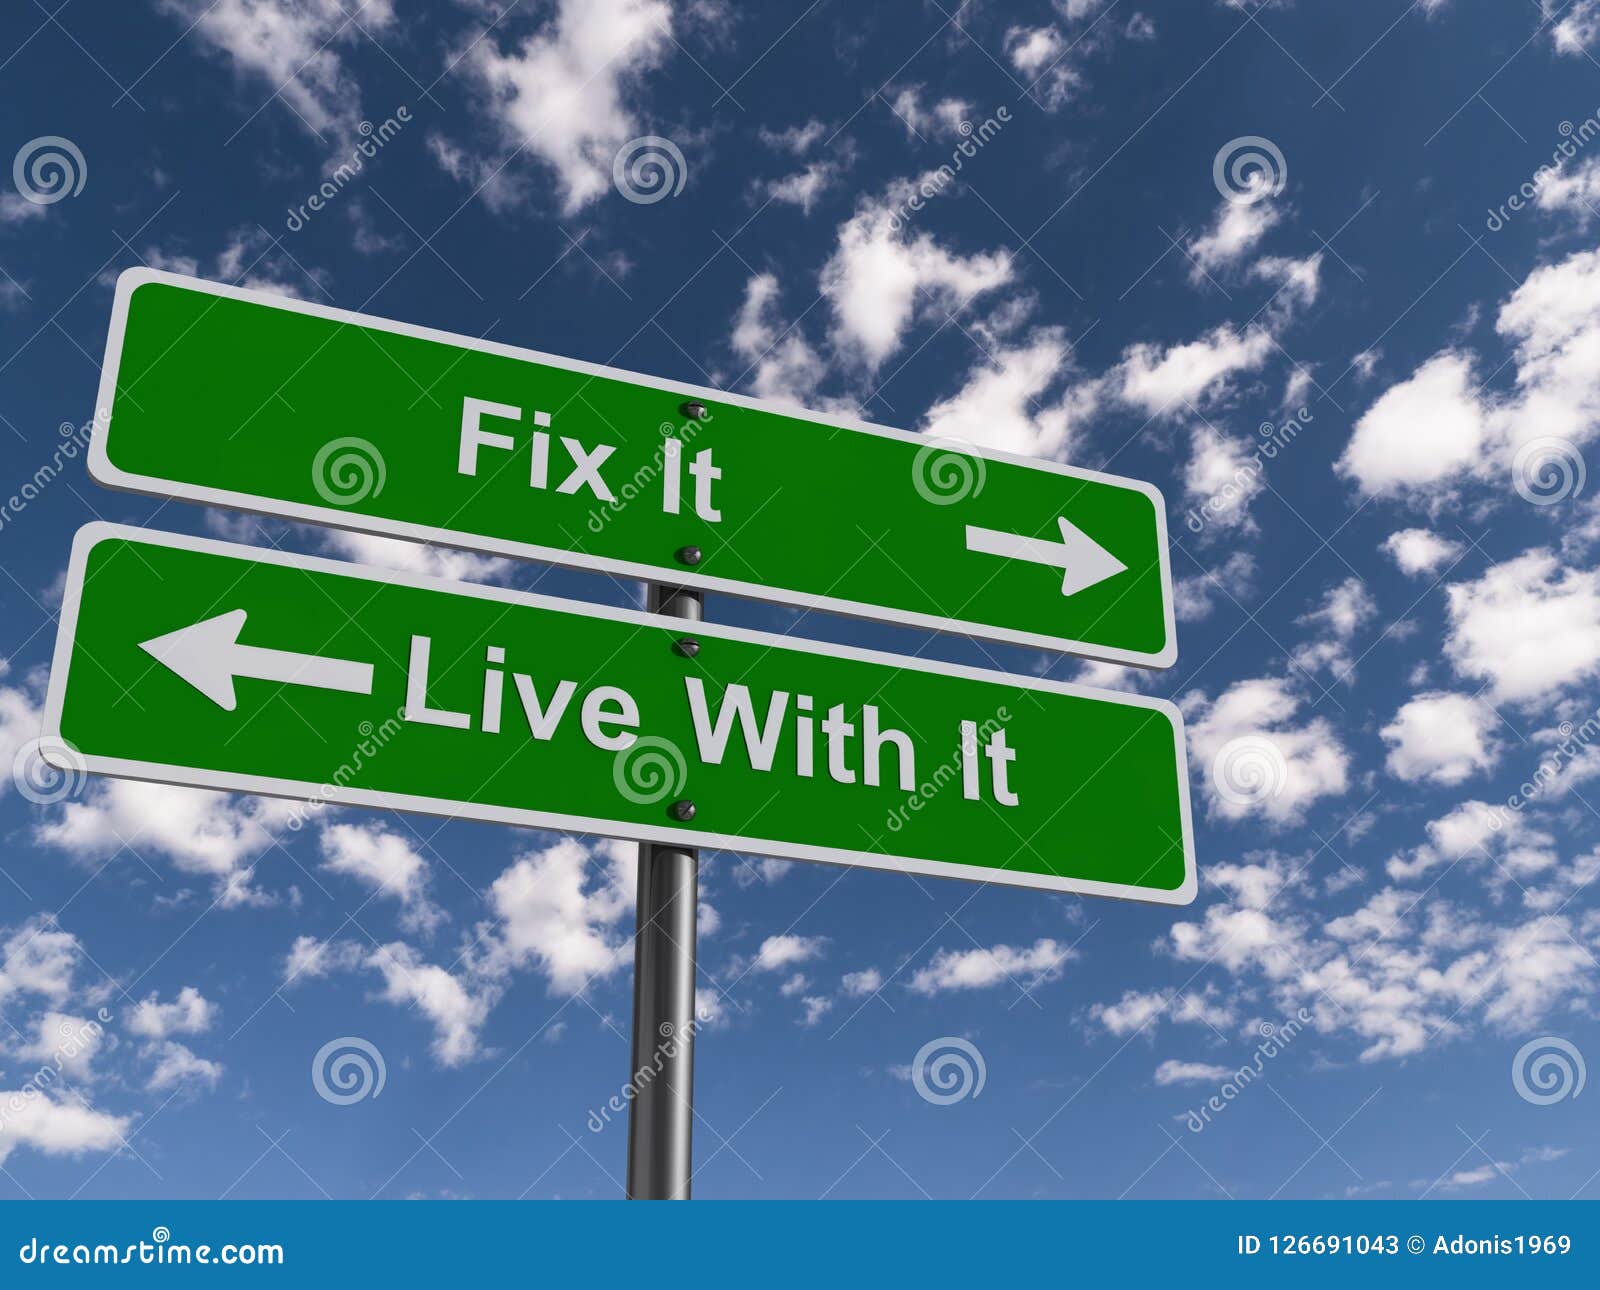 fix it or live with it signs